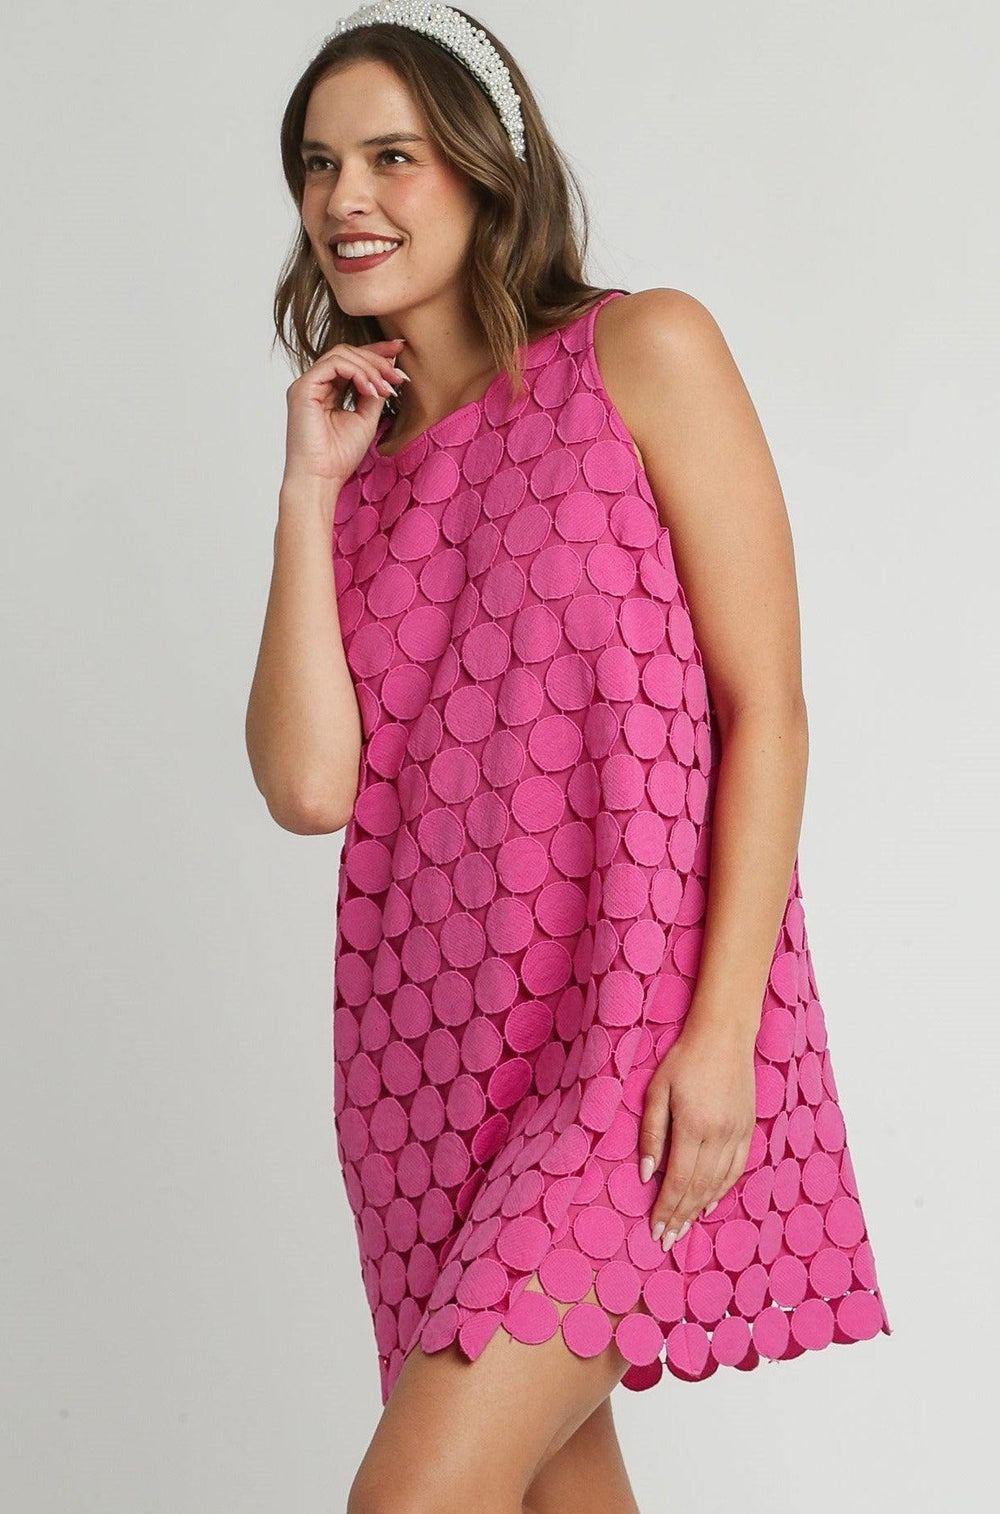 polka dot lace dress hot pink a line umgee brand tres chic boutique